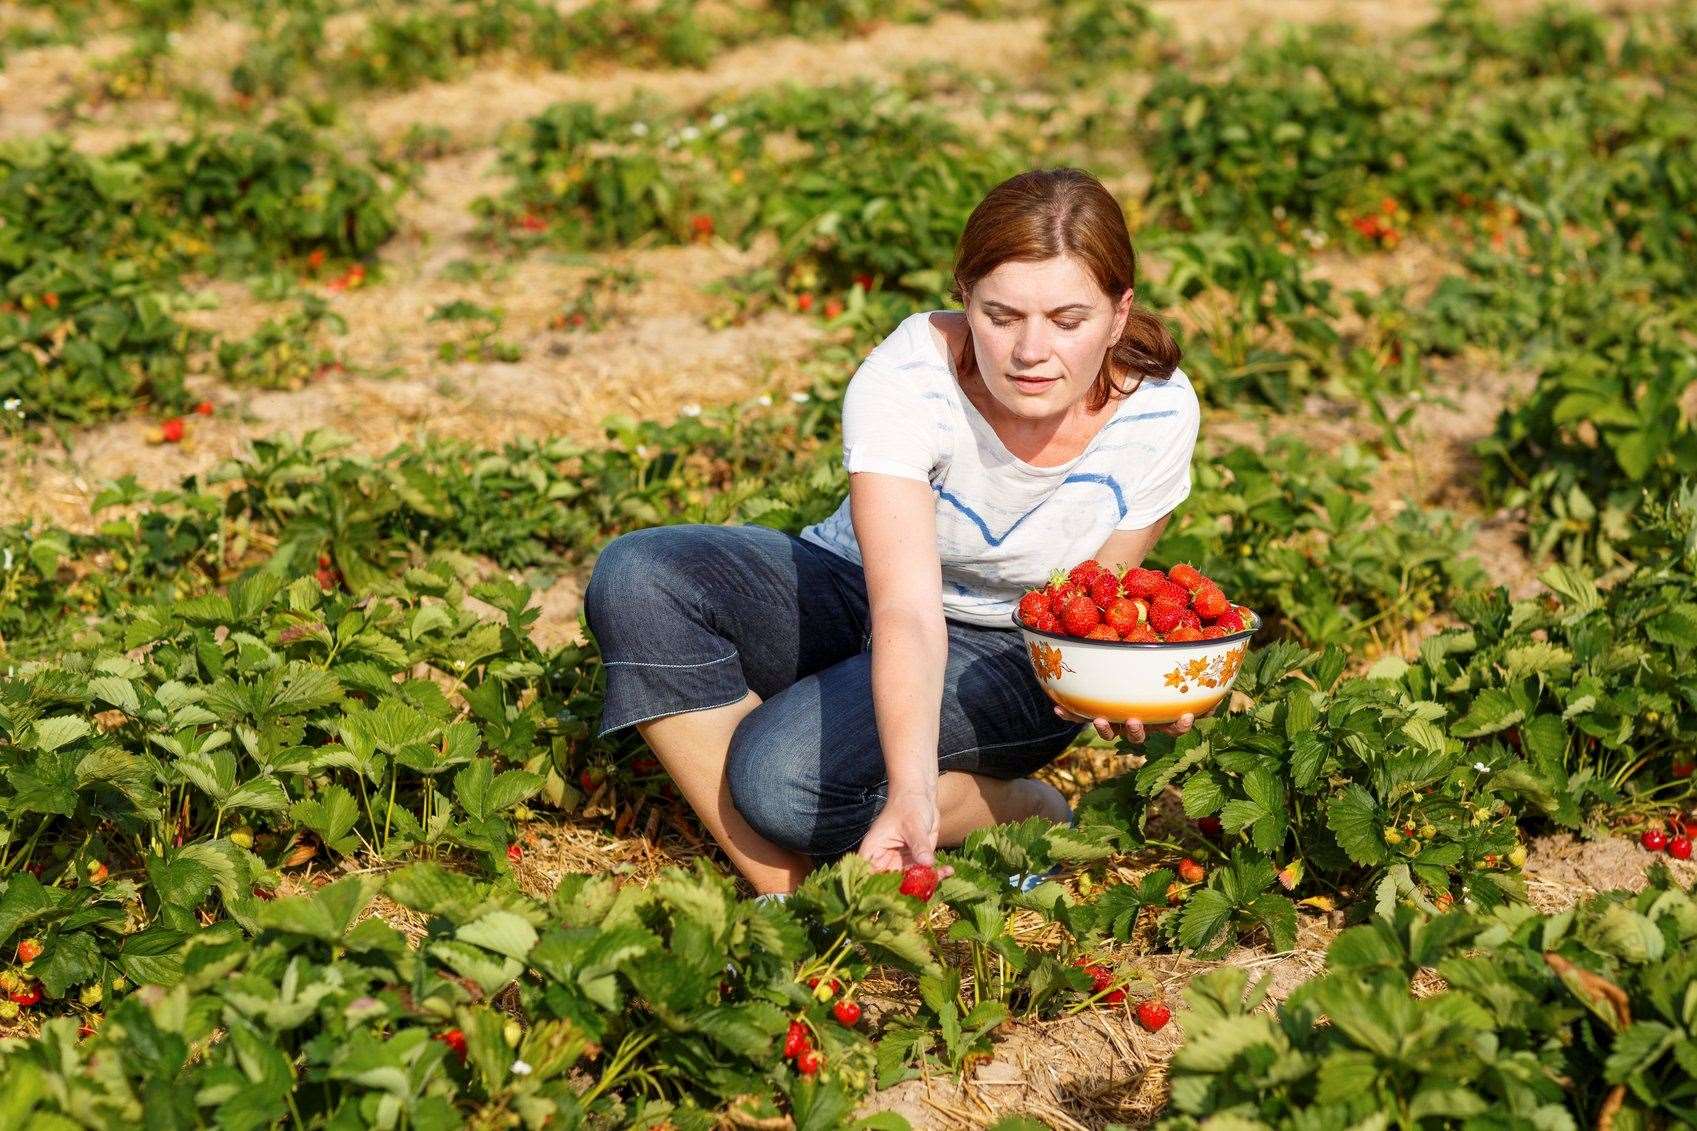 'Skivers' are afraid of hard work like fruit picking, according to one correspondent. Picture: iStock